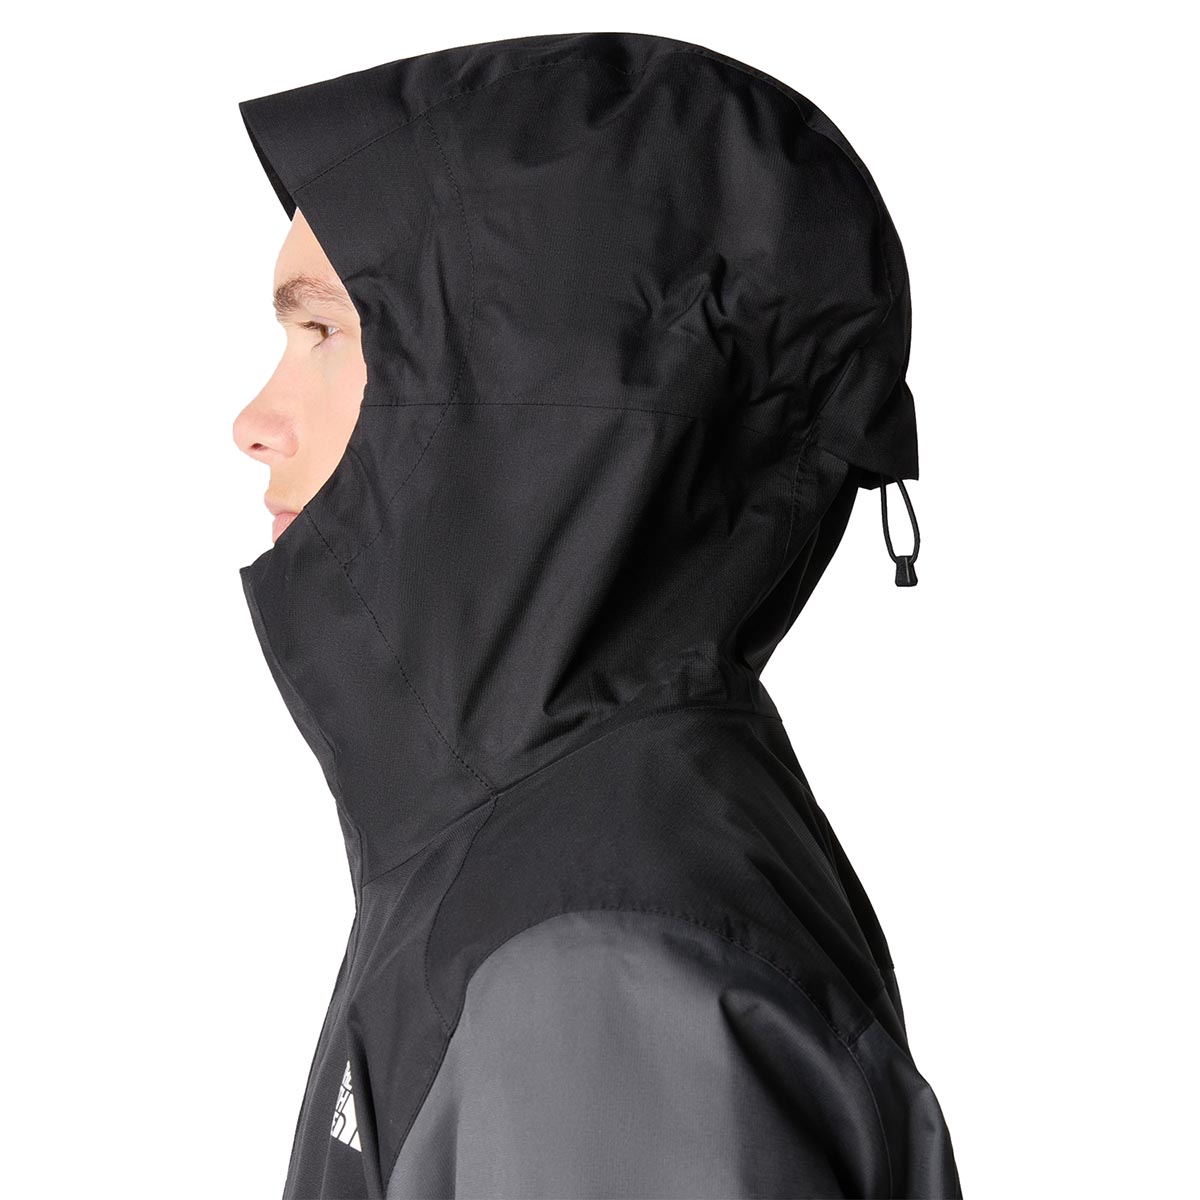 THE NORTH FACE - QUEST ZIP-IN JACKET